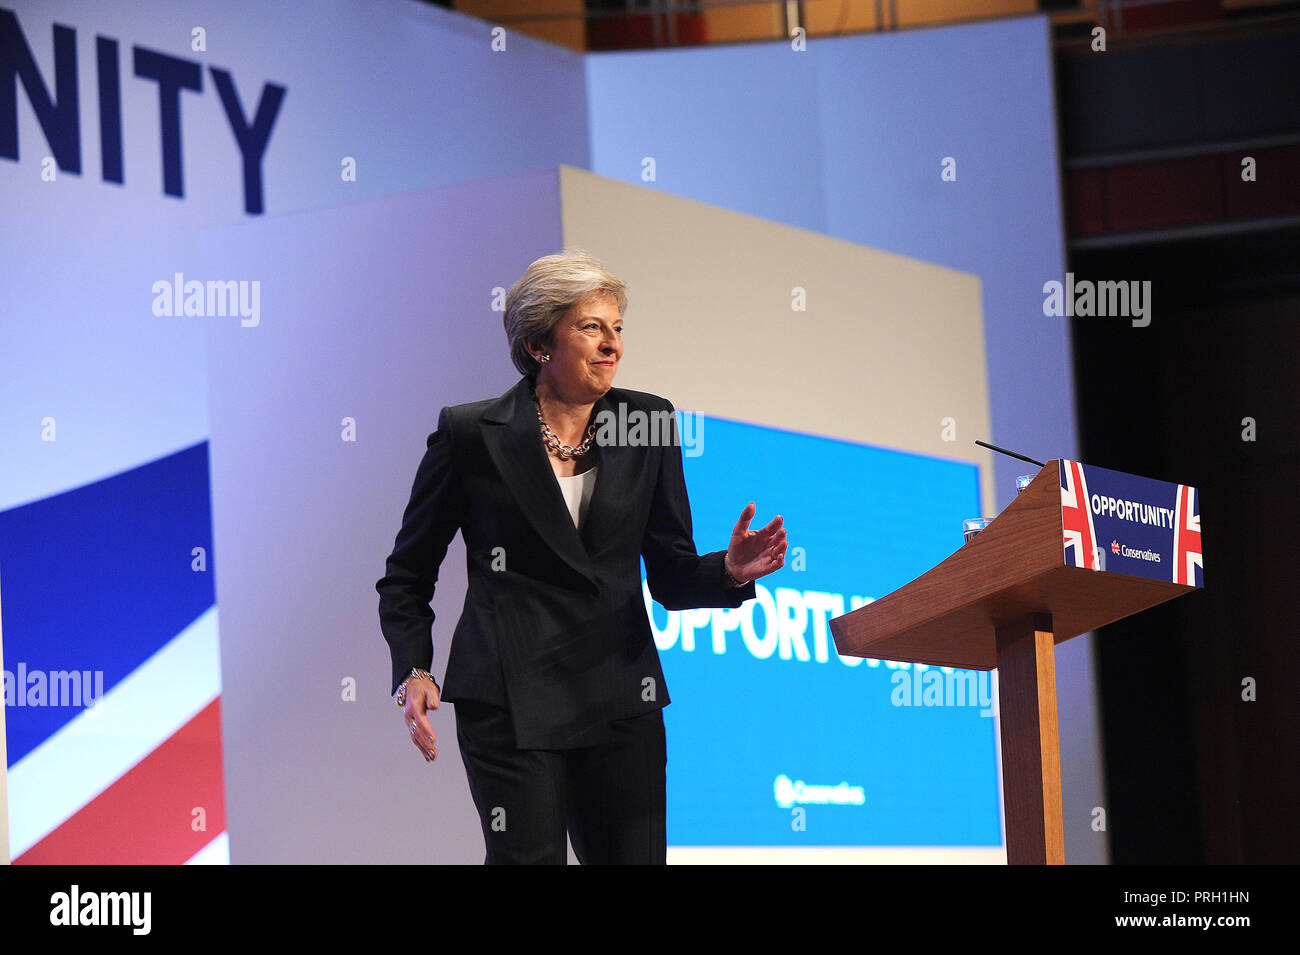 Birmingham, England. 3rd October, 2018.  Theresa May MP, Prime Minister and Leader of the Conservative Party, dances onto stage to deliver her keynote speech to conference on the closing session of the fourth day of the Conservative Party annual conference at the ICC.  Kevin Hayes/Alamy Live News Credit: Kevin Hayes/Alamy Live News Stock Photo